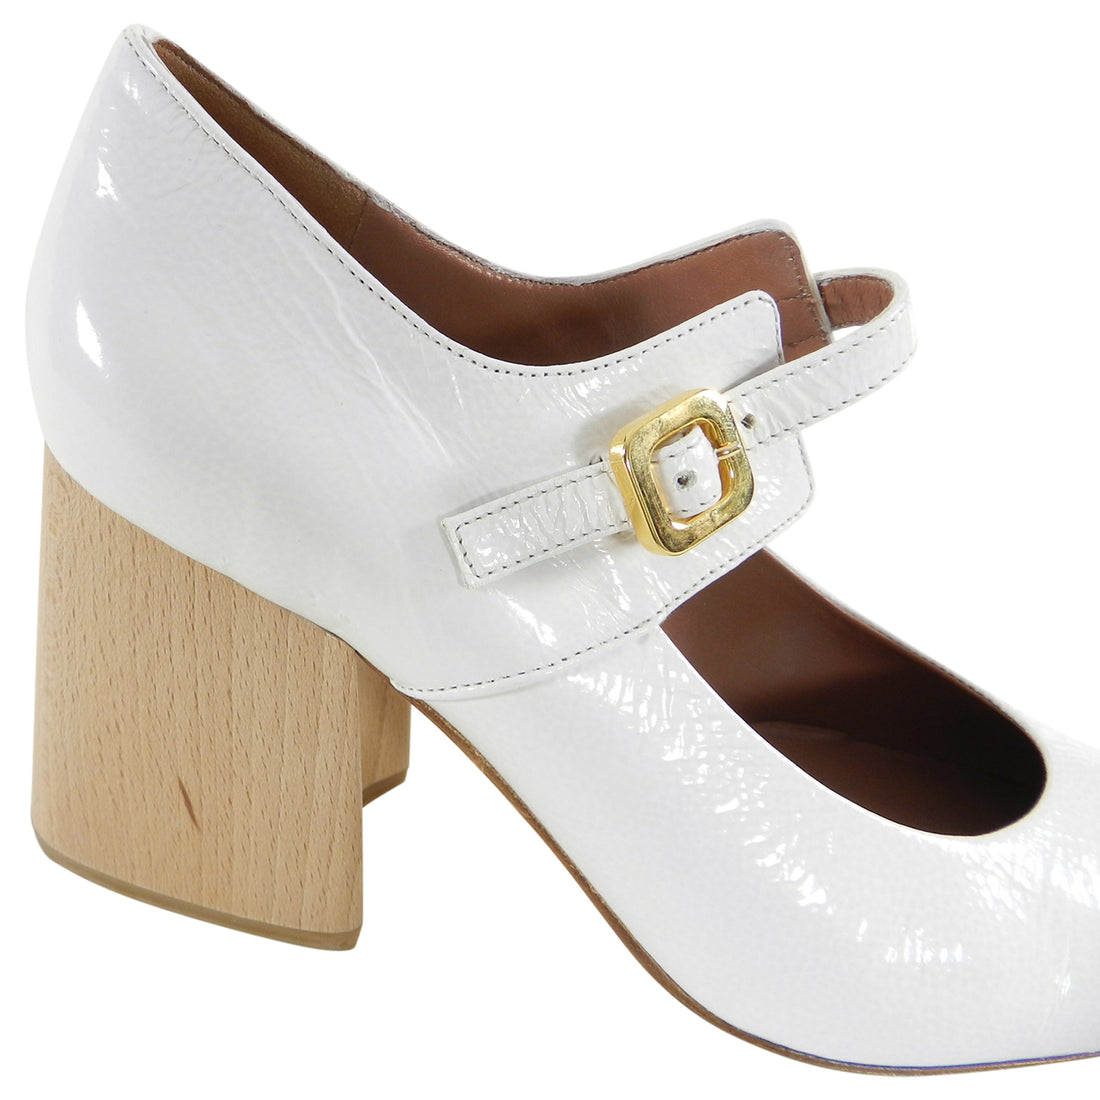 Marni White Patent Mary Jane Shoes with Wood Heel.  From the pre-fall 2017 collection. Chunky lacquered wood heel, gold buckle.  Original retail $880 USD.  Grips added on bottom sole by previous owner. Excellent pre-owned condition.  Worn a few times.  Duster and box not included.